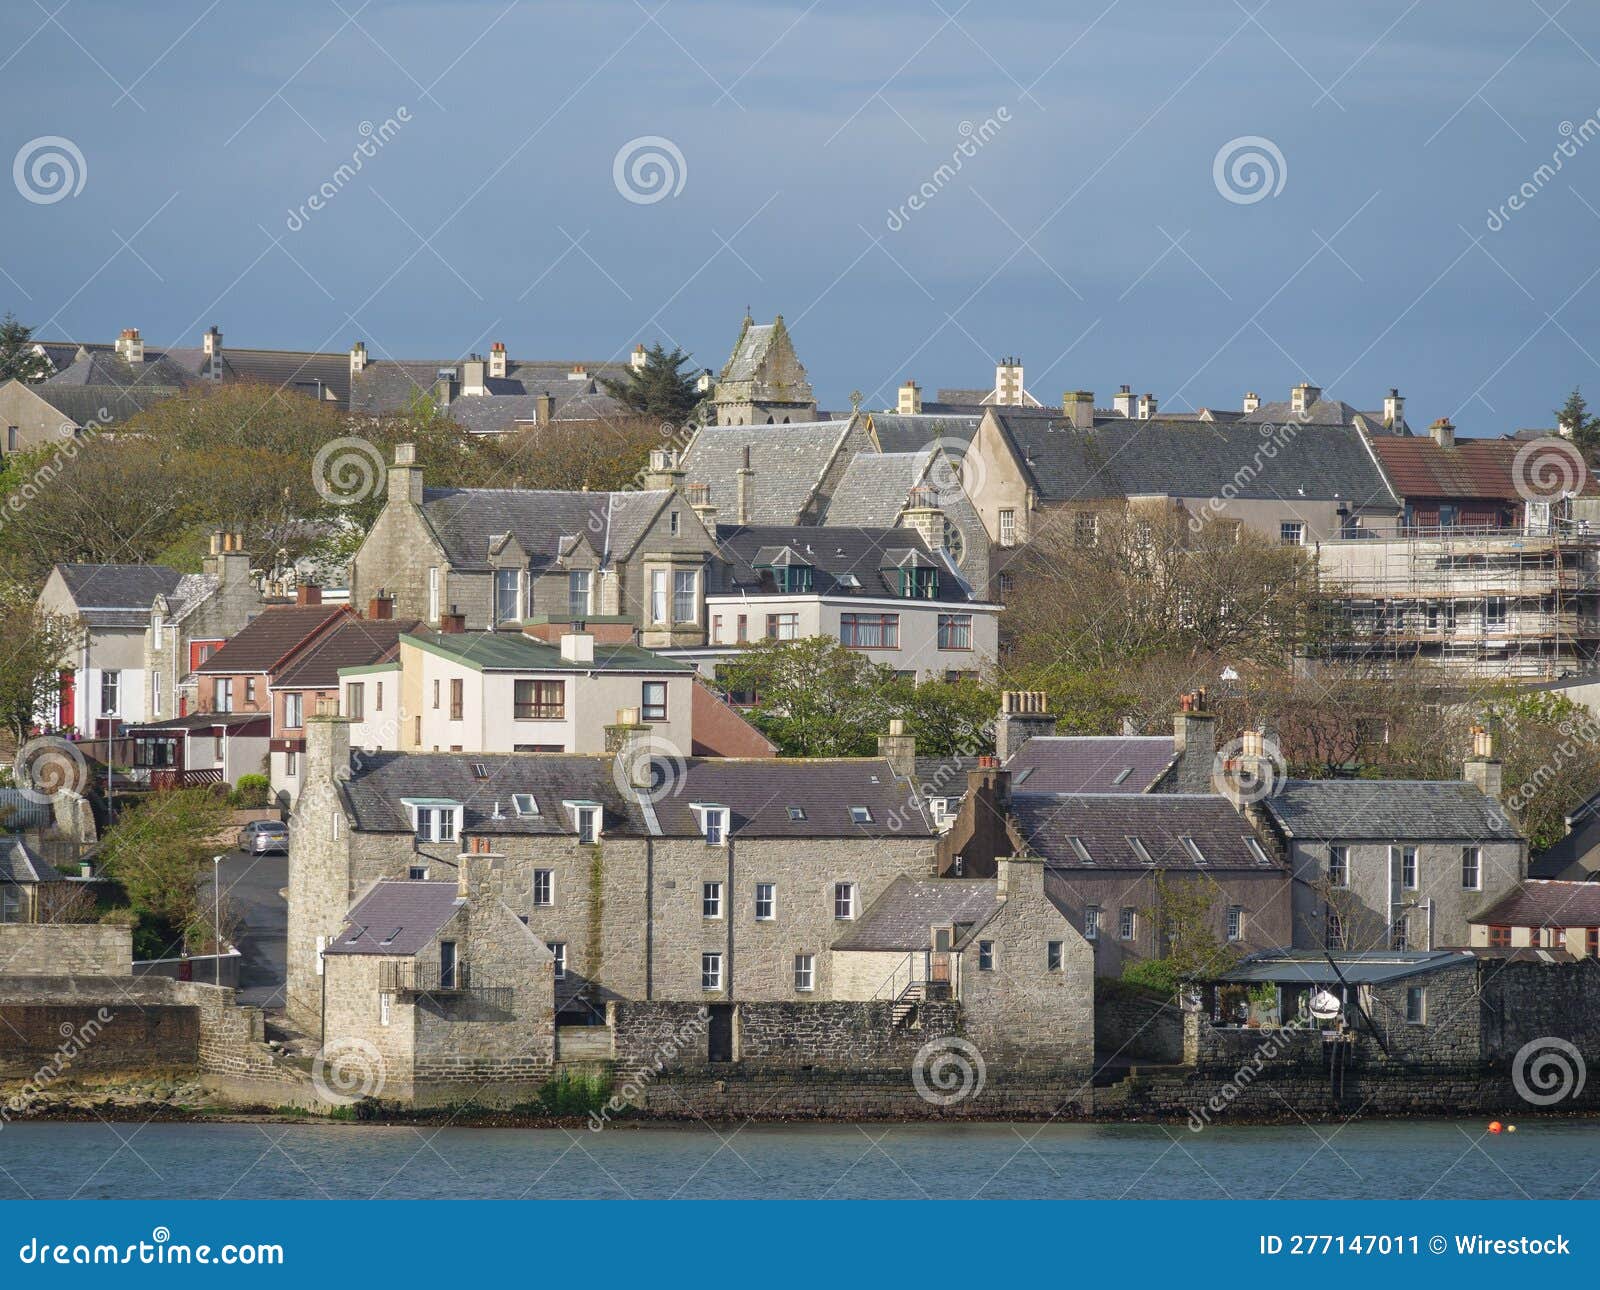 view of a rural city situated in the shetlands islands of scotland, nestled near a body of water